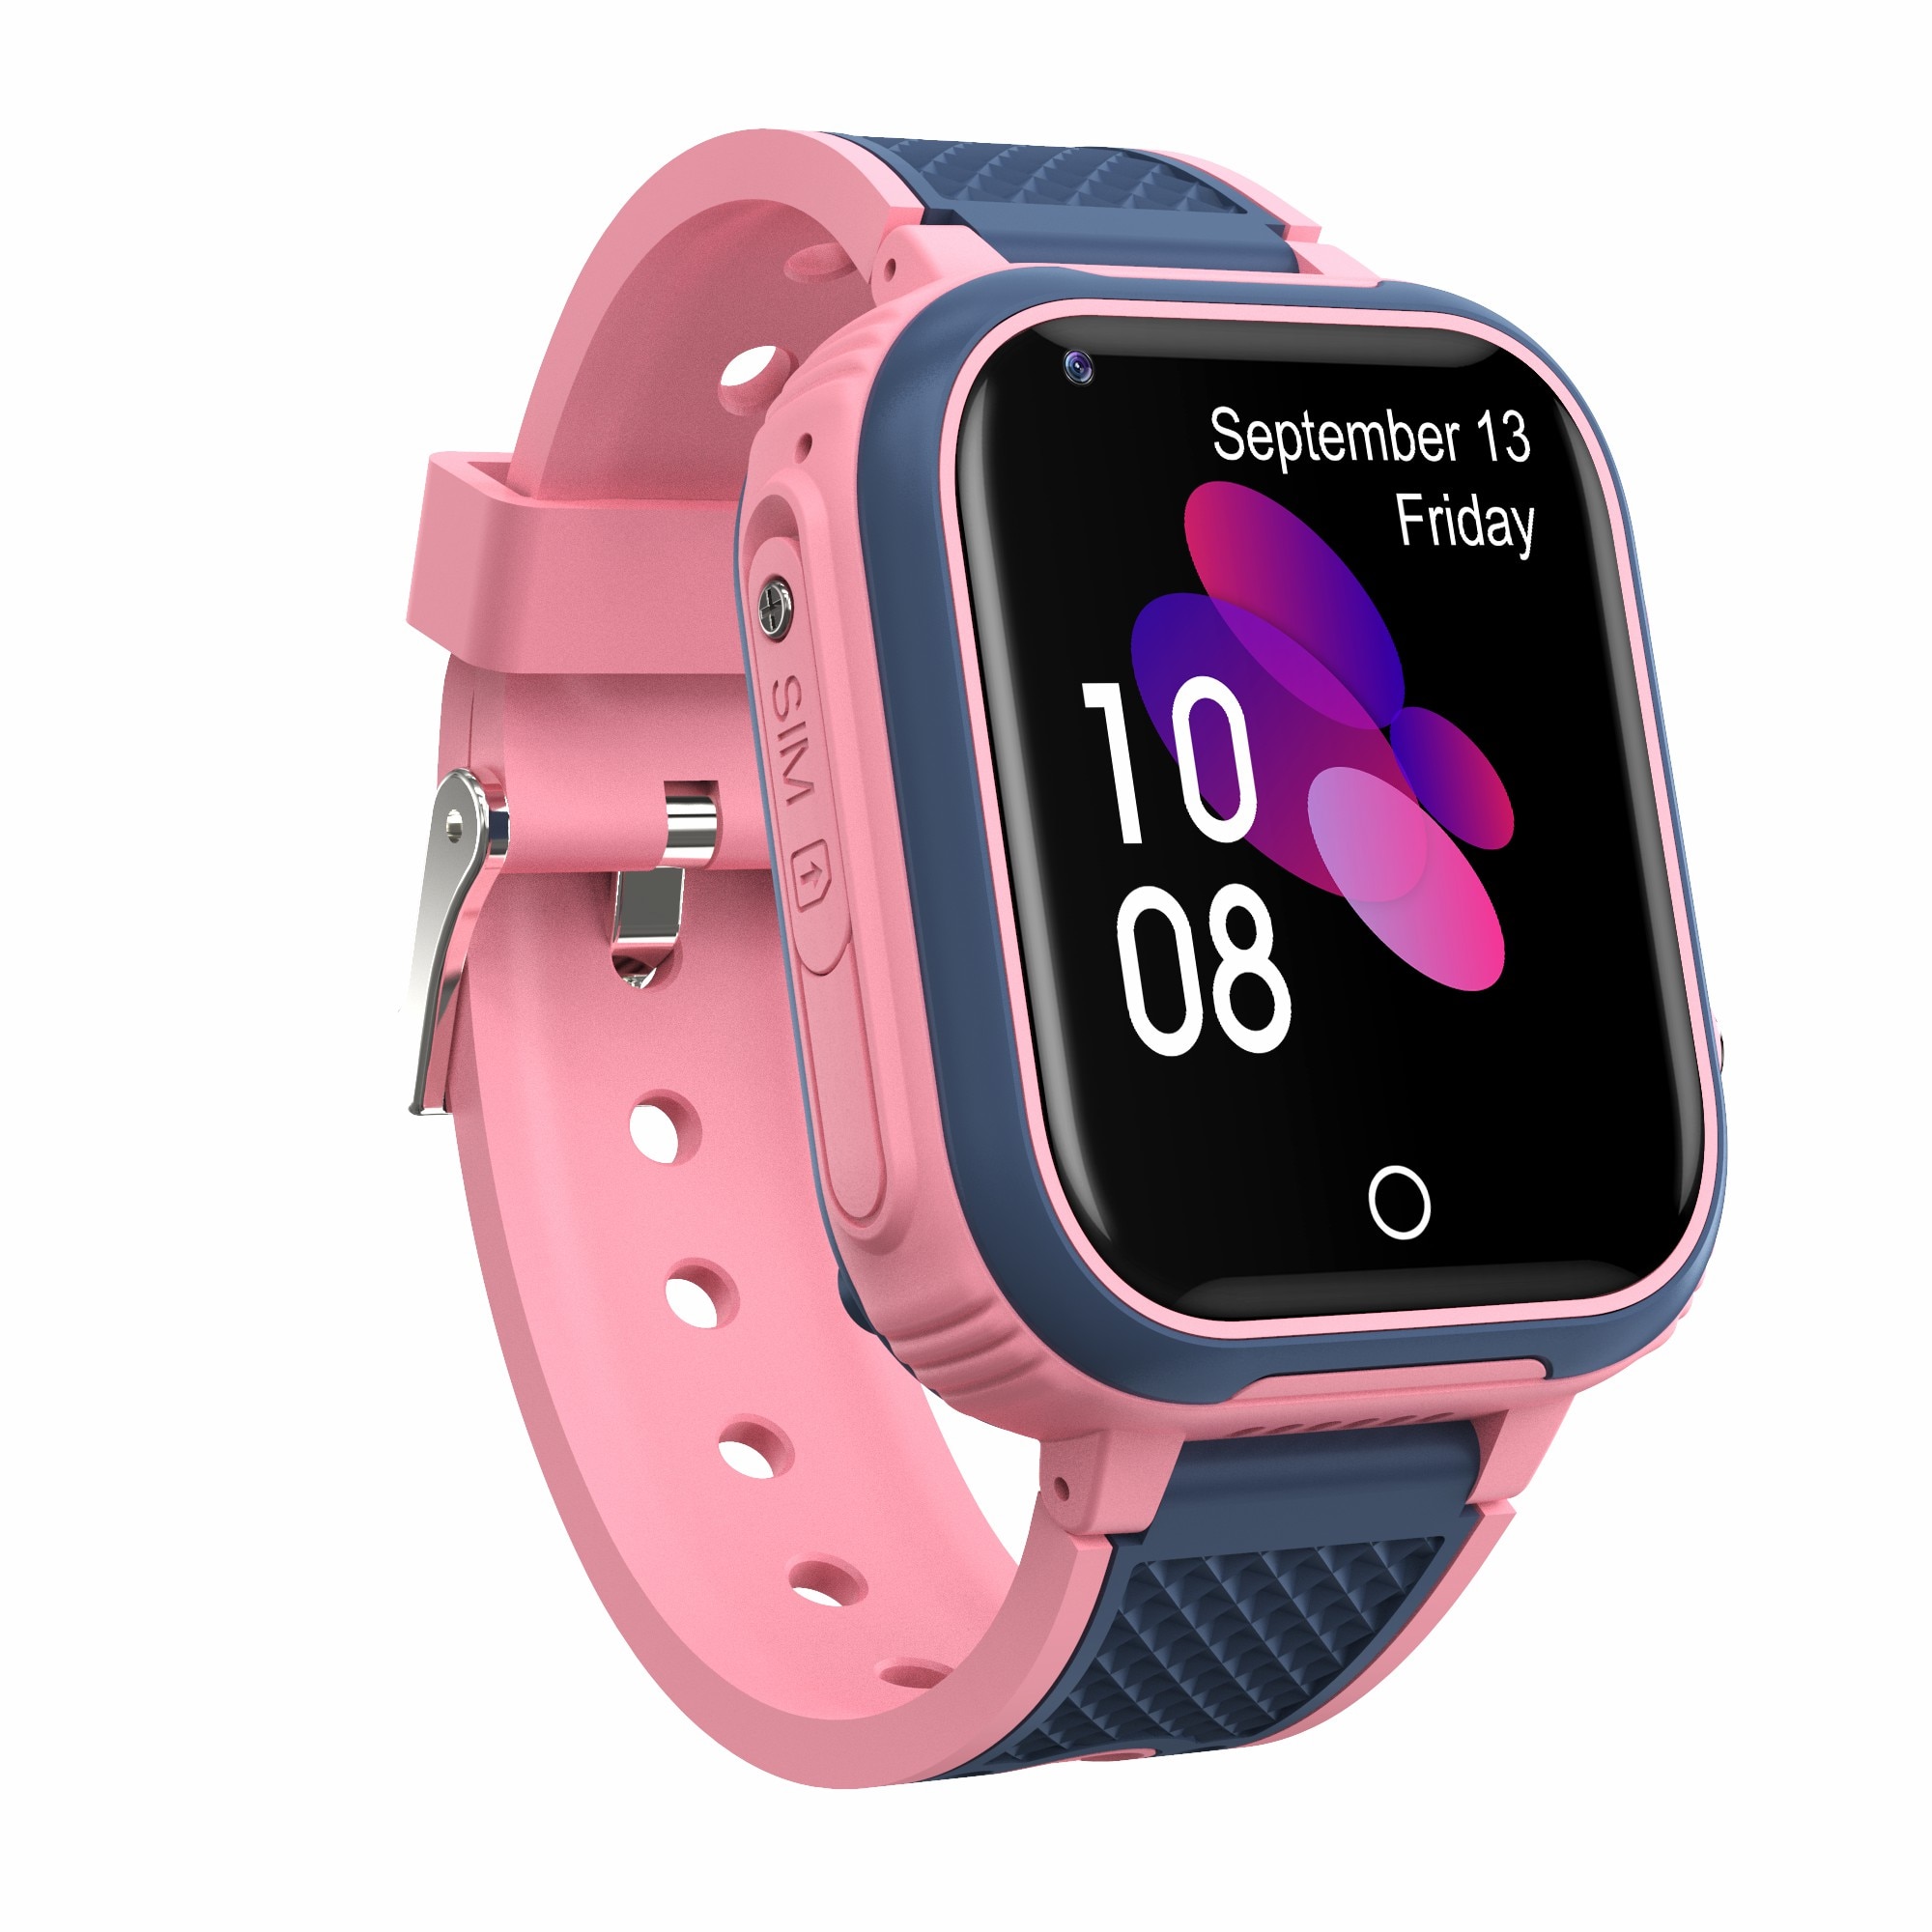 Children's 4G Smart Watch with Video Call